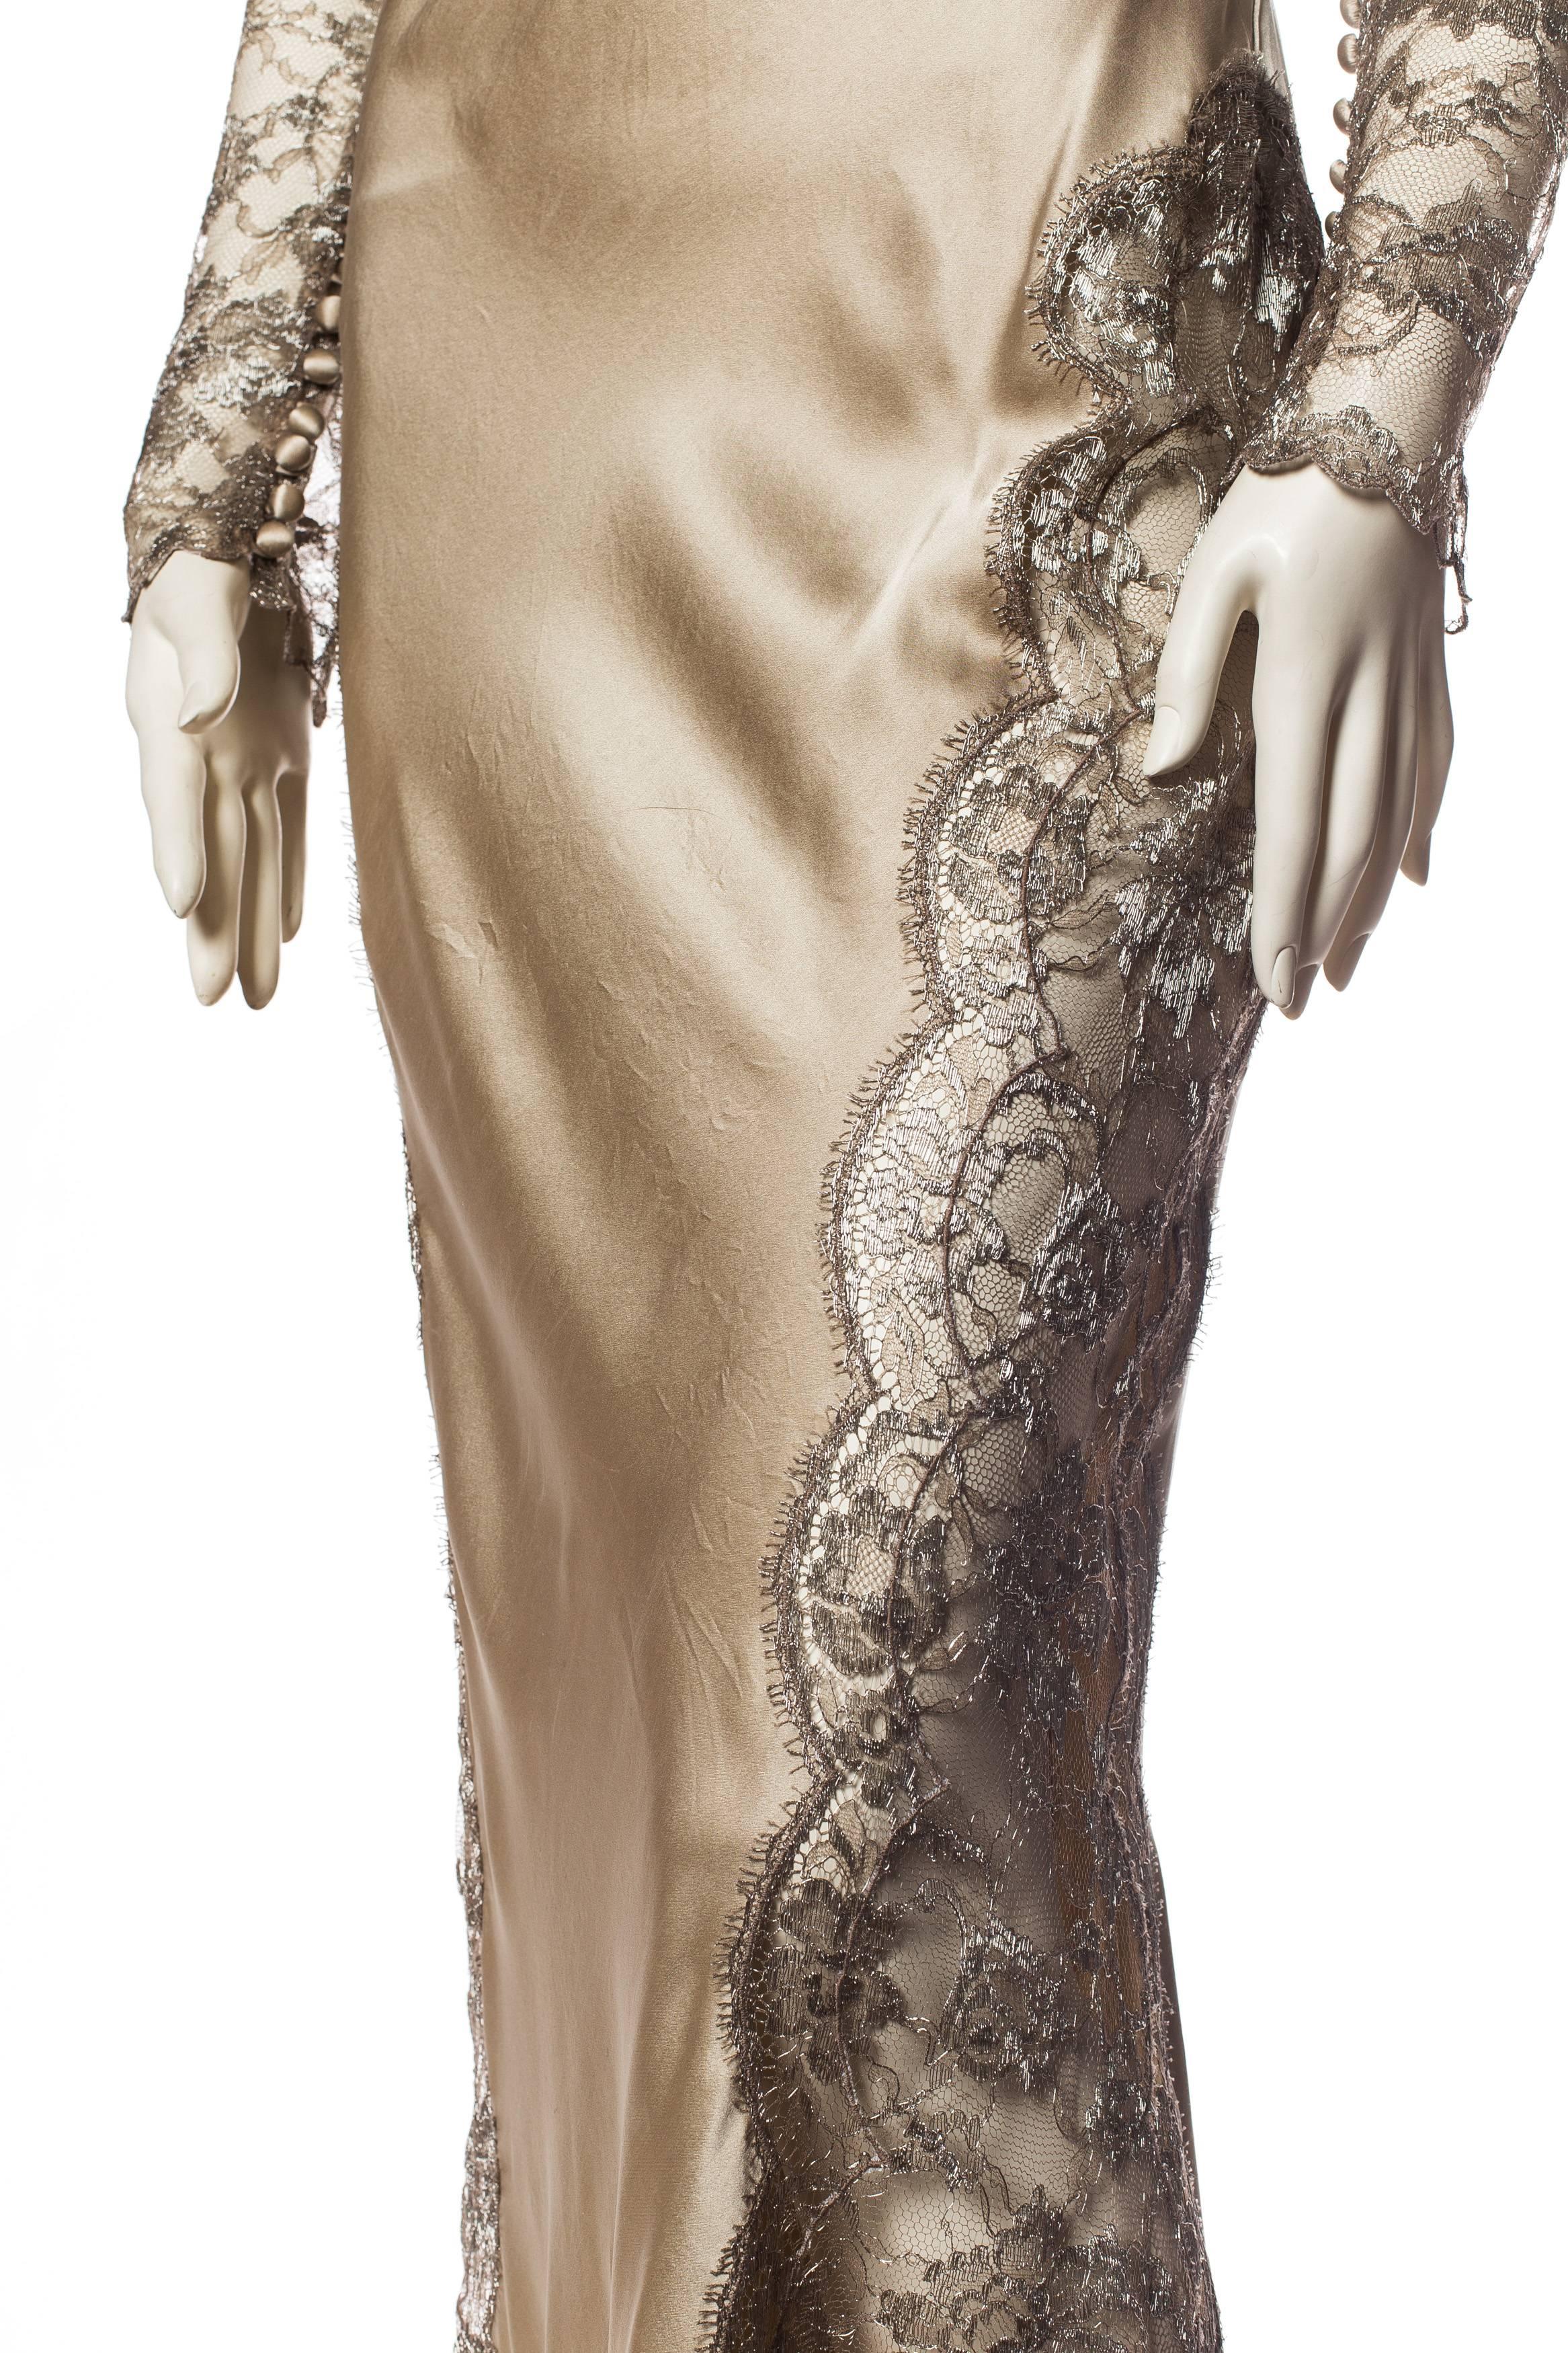 Richard Tyler Washed Silk And Lace Bias Cut Gown Dress For Sale 4